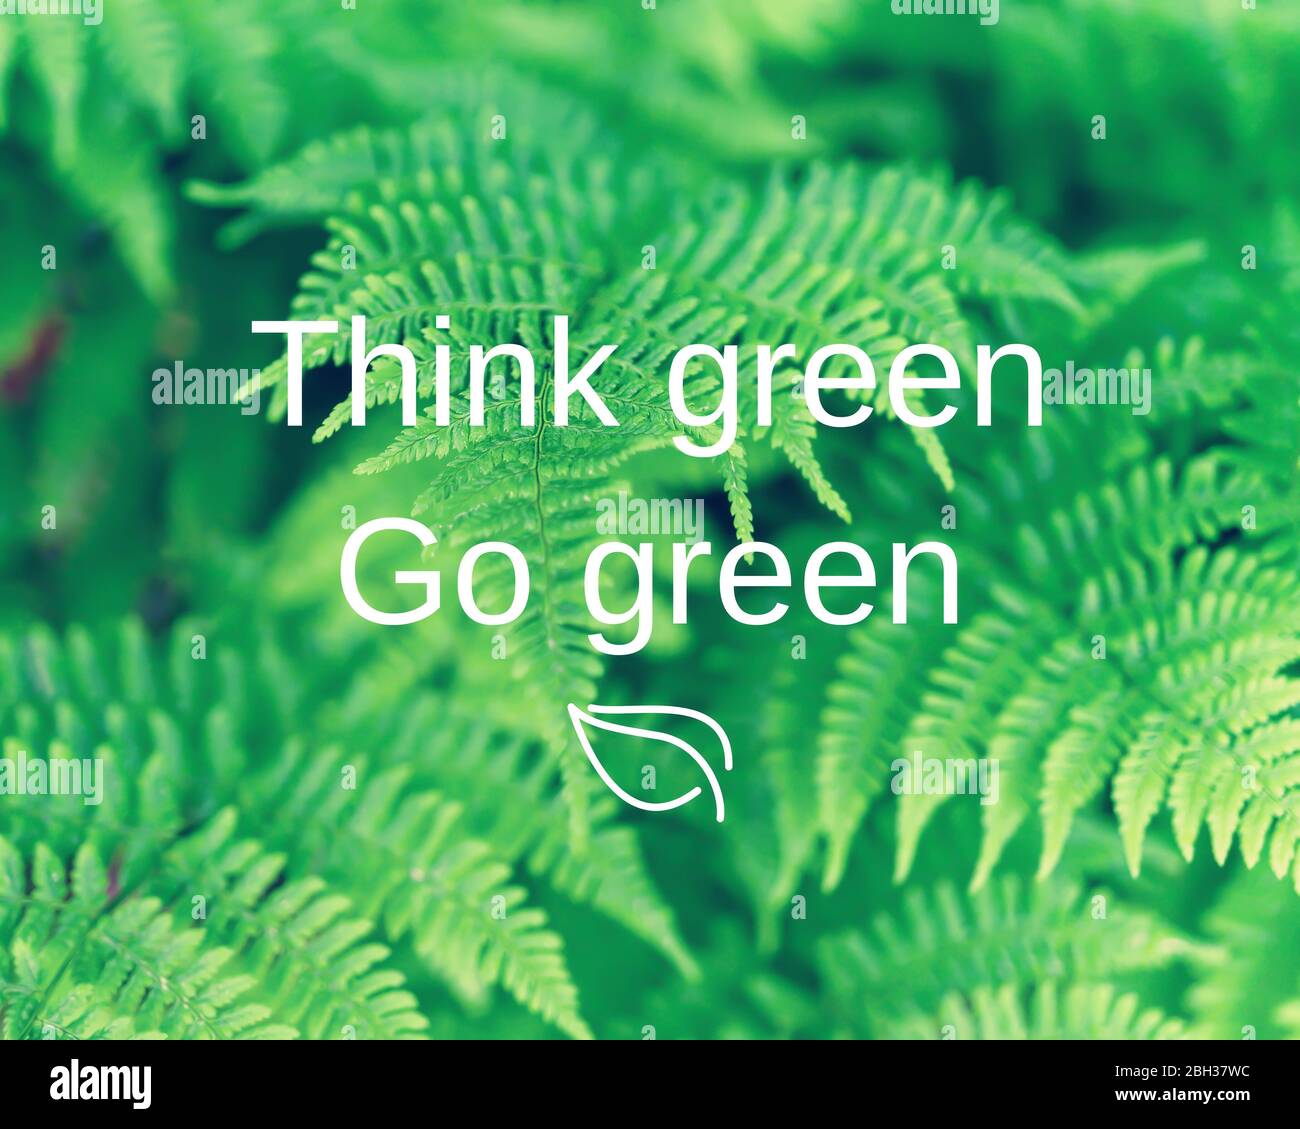 Inspirational Typographic Quote – Think green Go green, on a background ow woodland ferns. Stock Photo